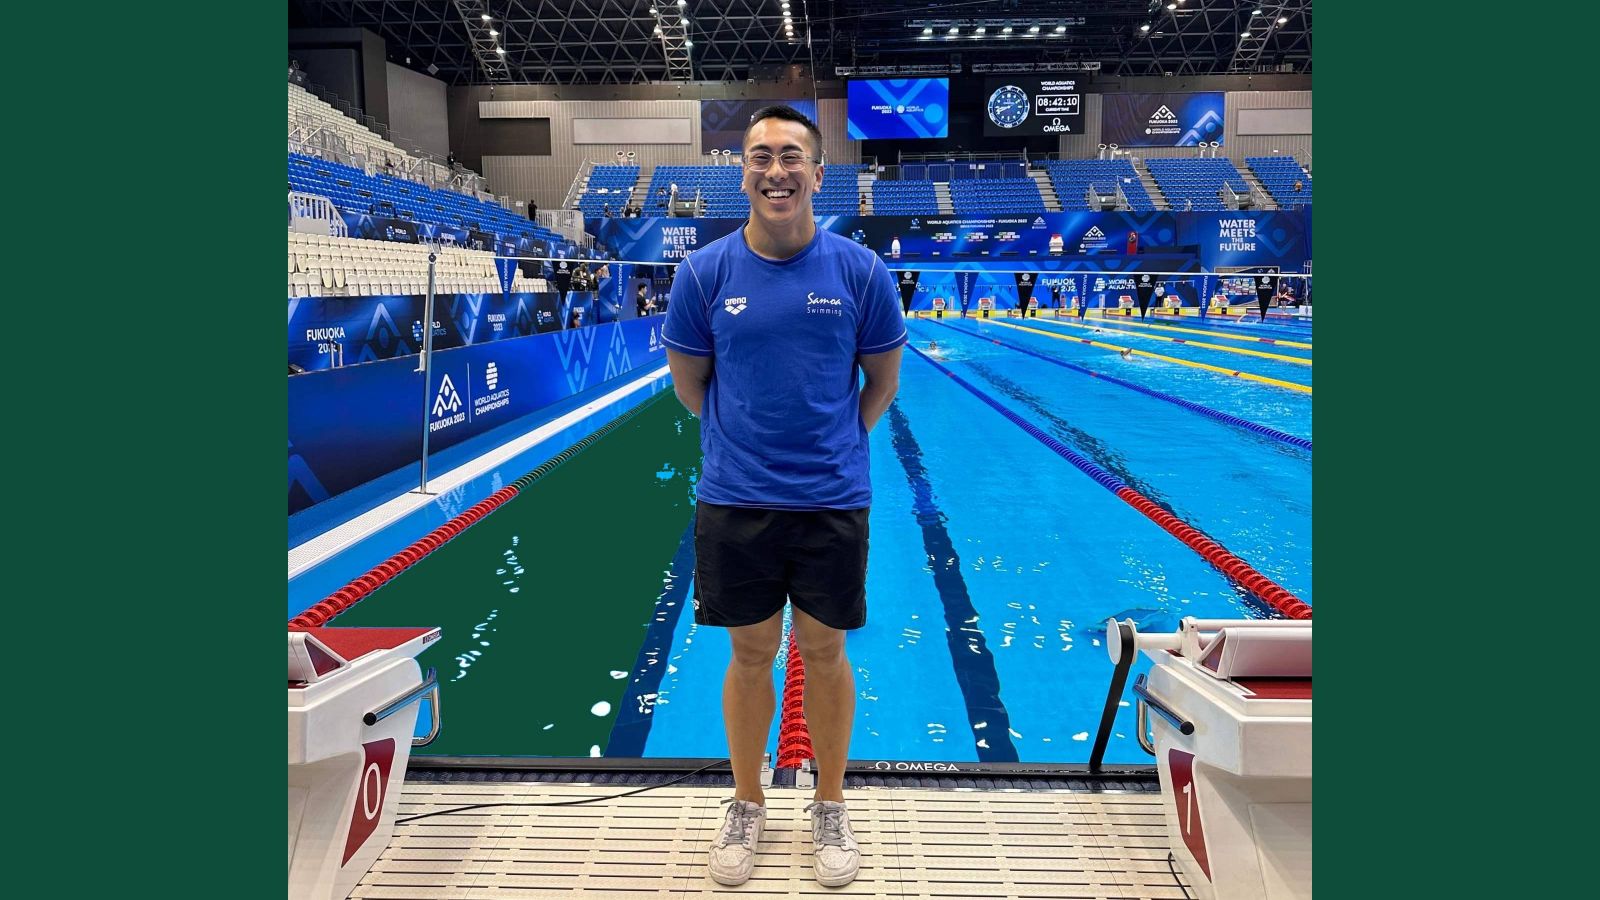 Kokoro Frost is standing at the side of a swimming pool at the World Championships in Japan.